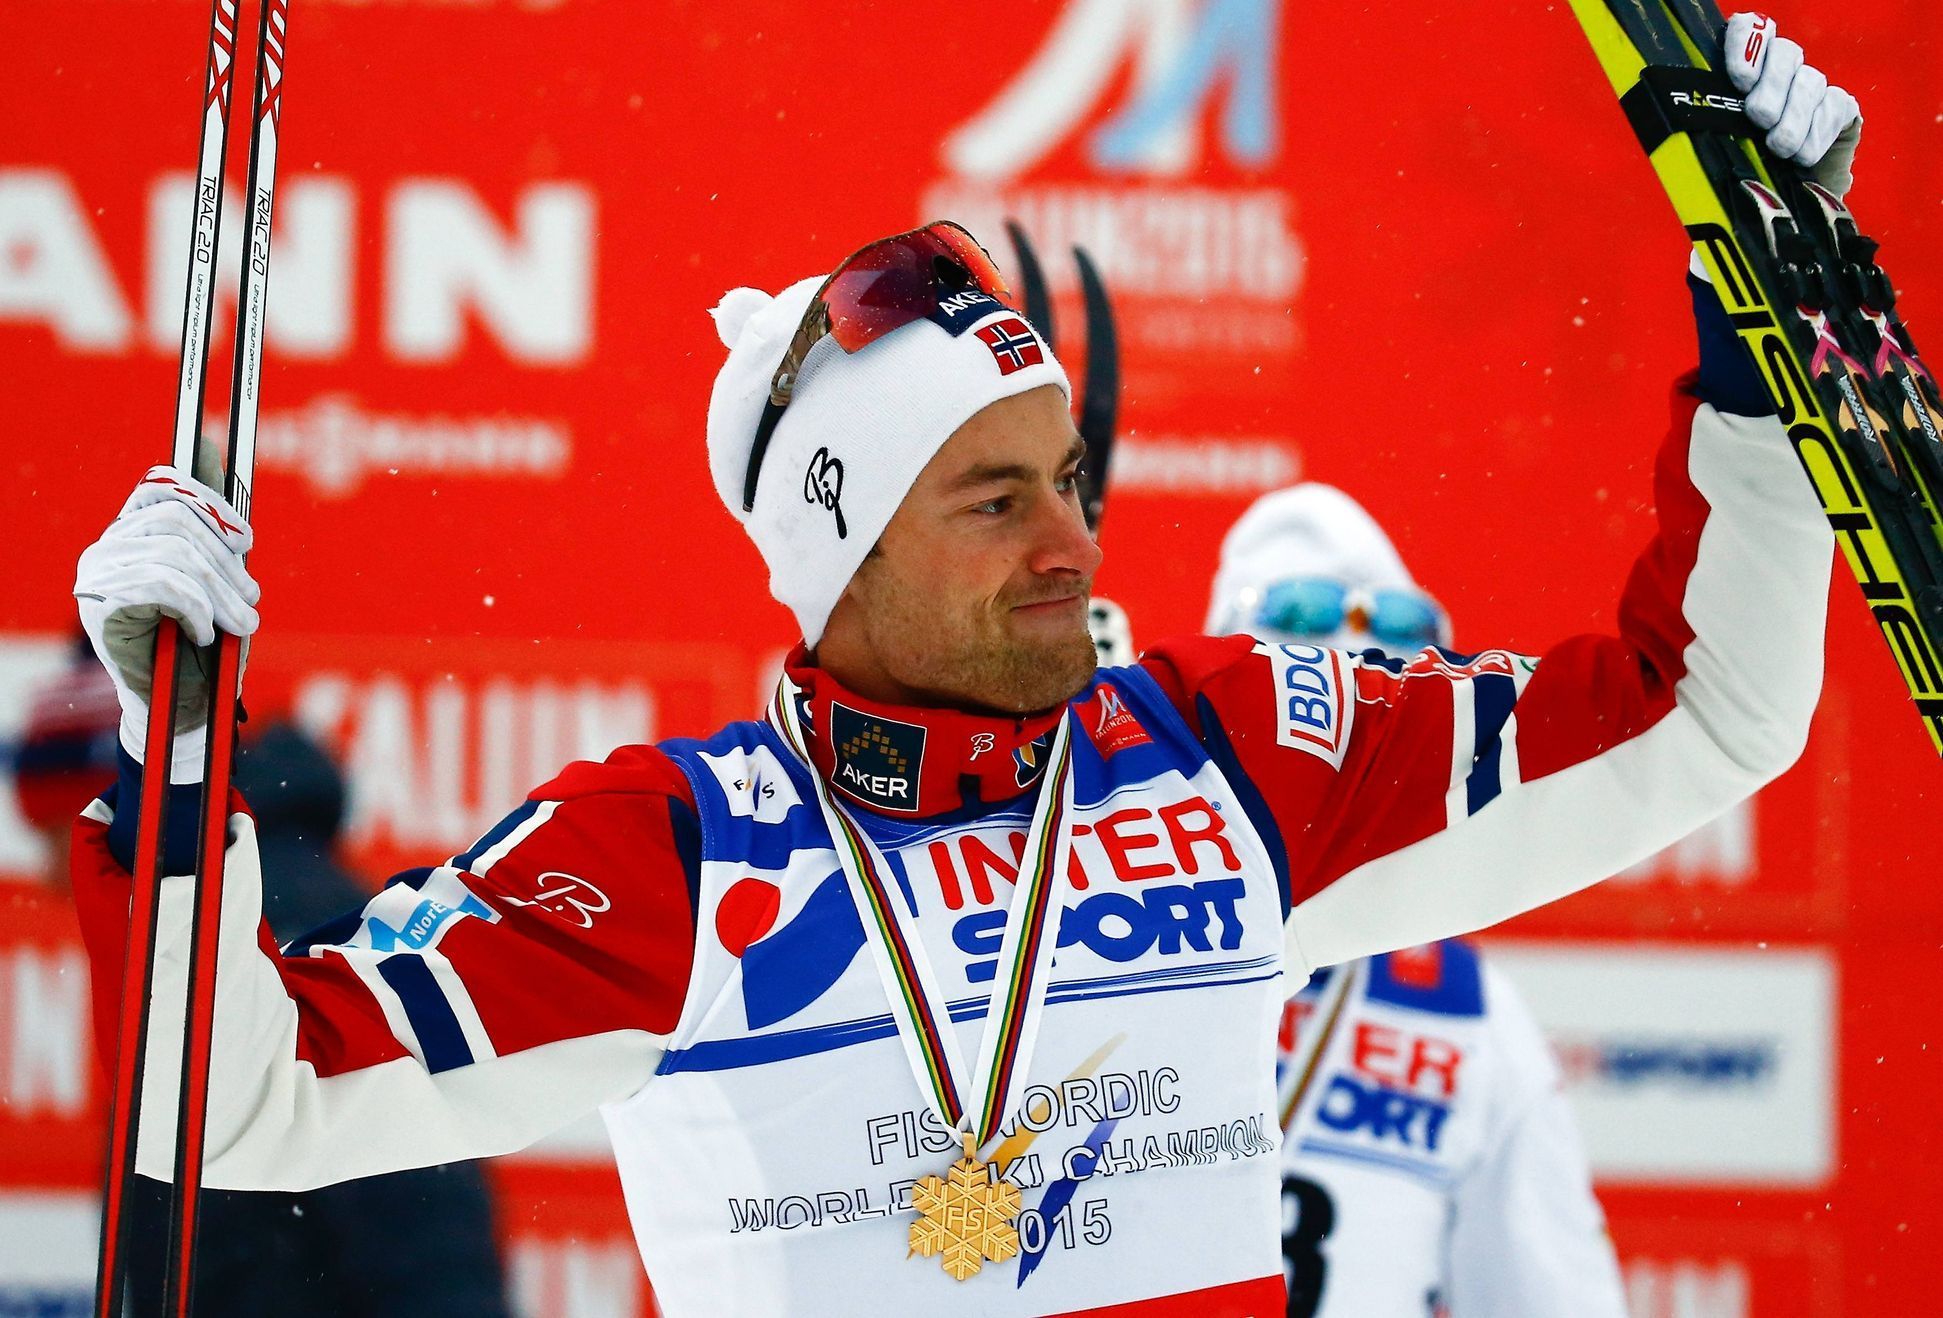 Norway's Northug celebrates winning the men's cross country 50 km mass start classic race at the Nordic World Ski Championships in Falun